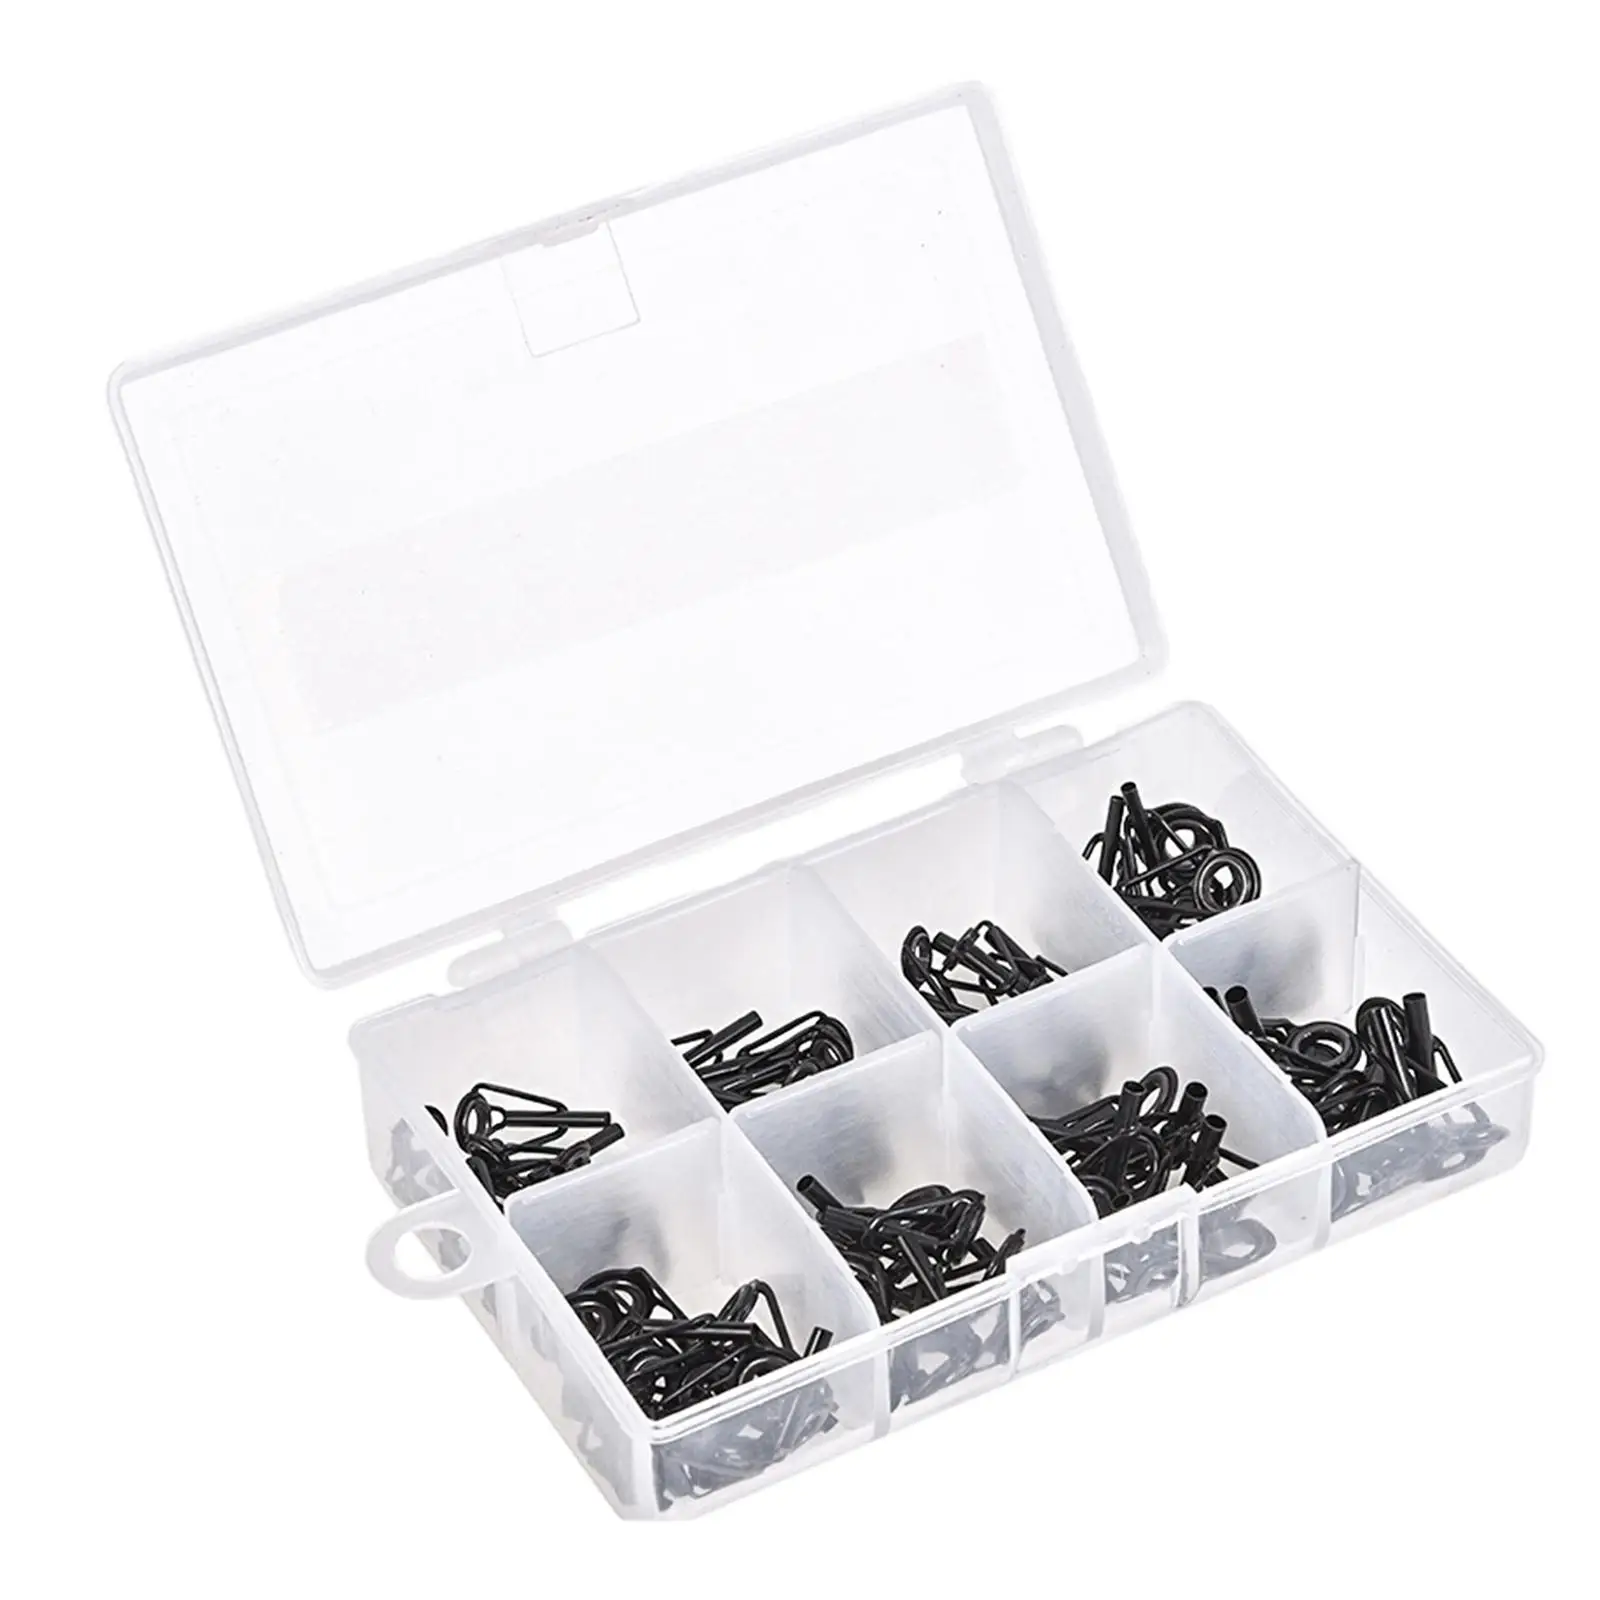 80Pcs Fishing Rod Tips Replacement Ceramic Rings 8 Sizes Black Guide Tips